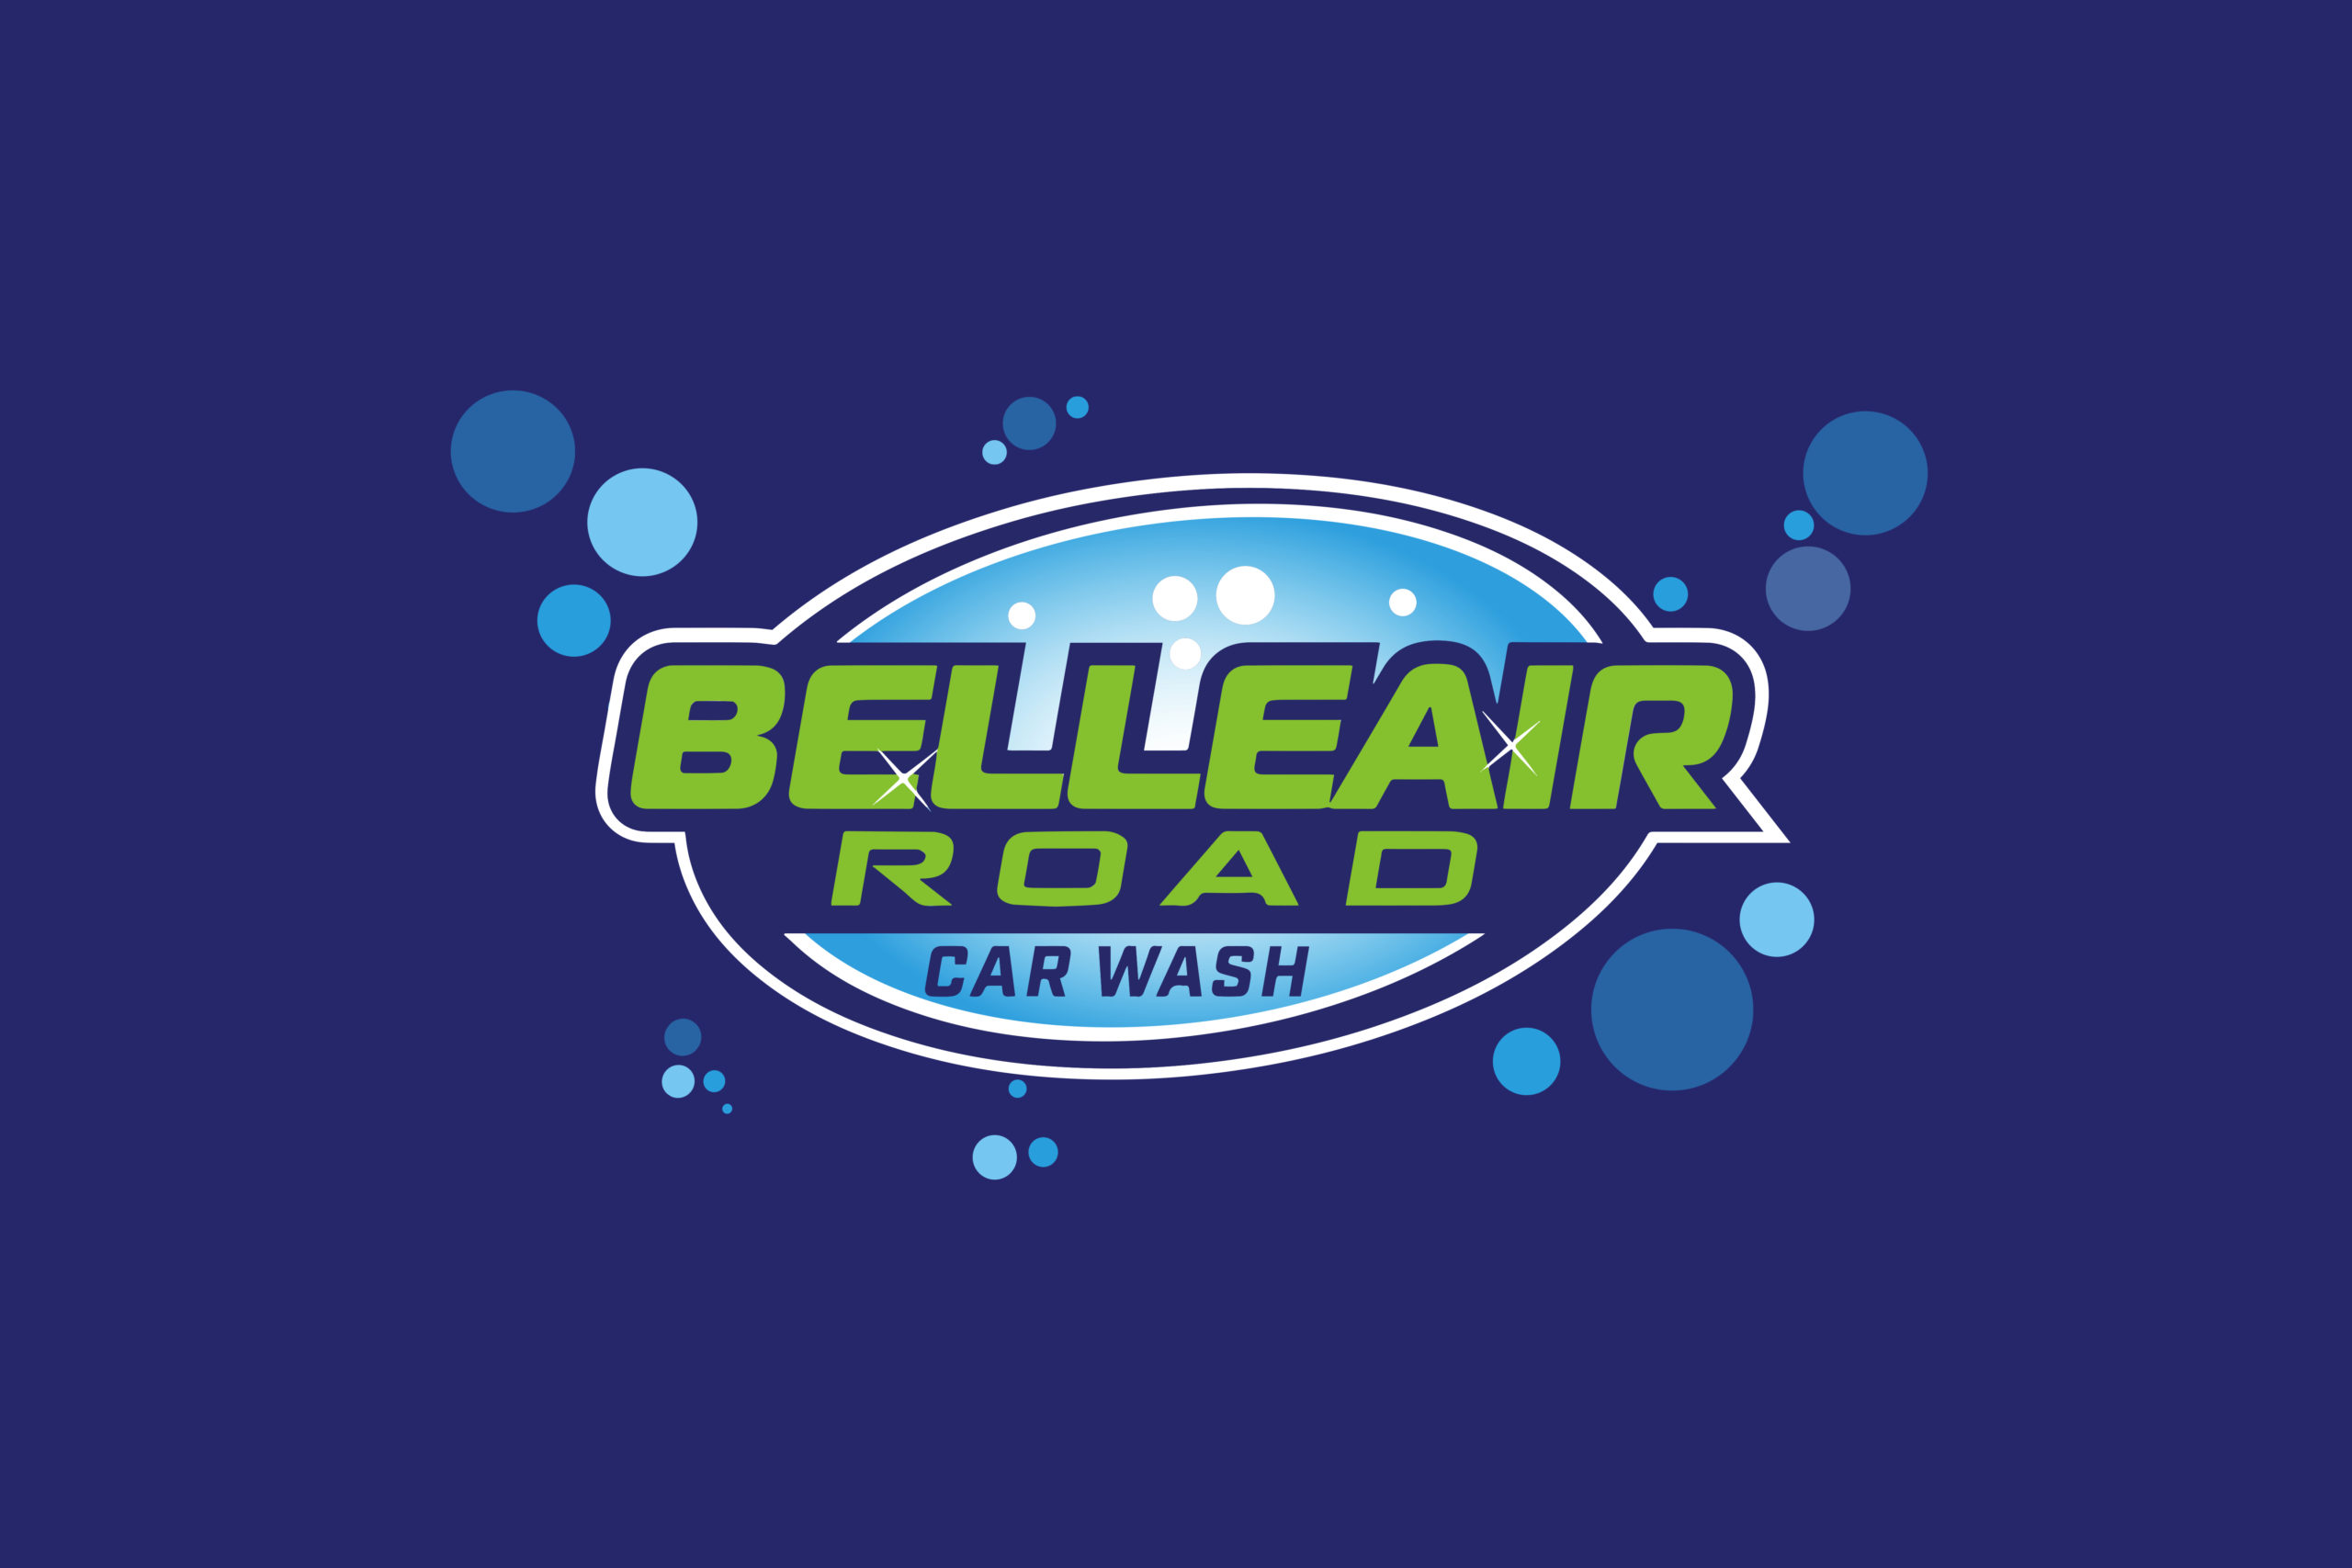 Belleair Road Car Wash logo on blue background with bubbles